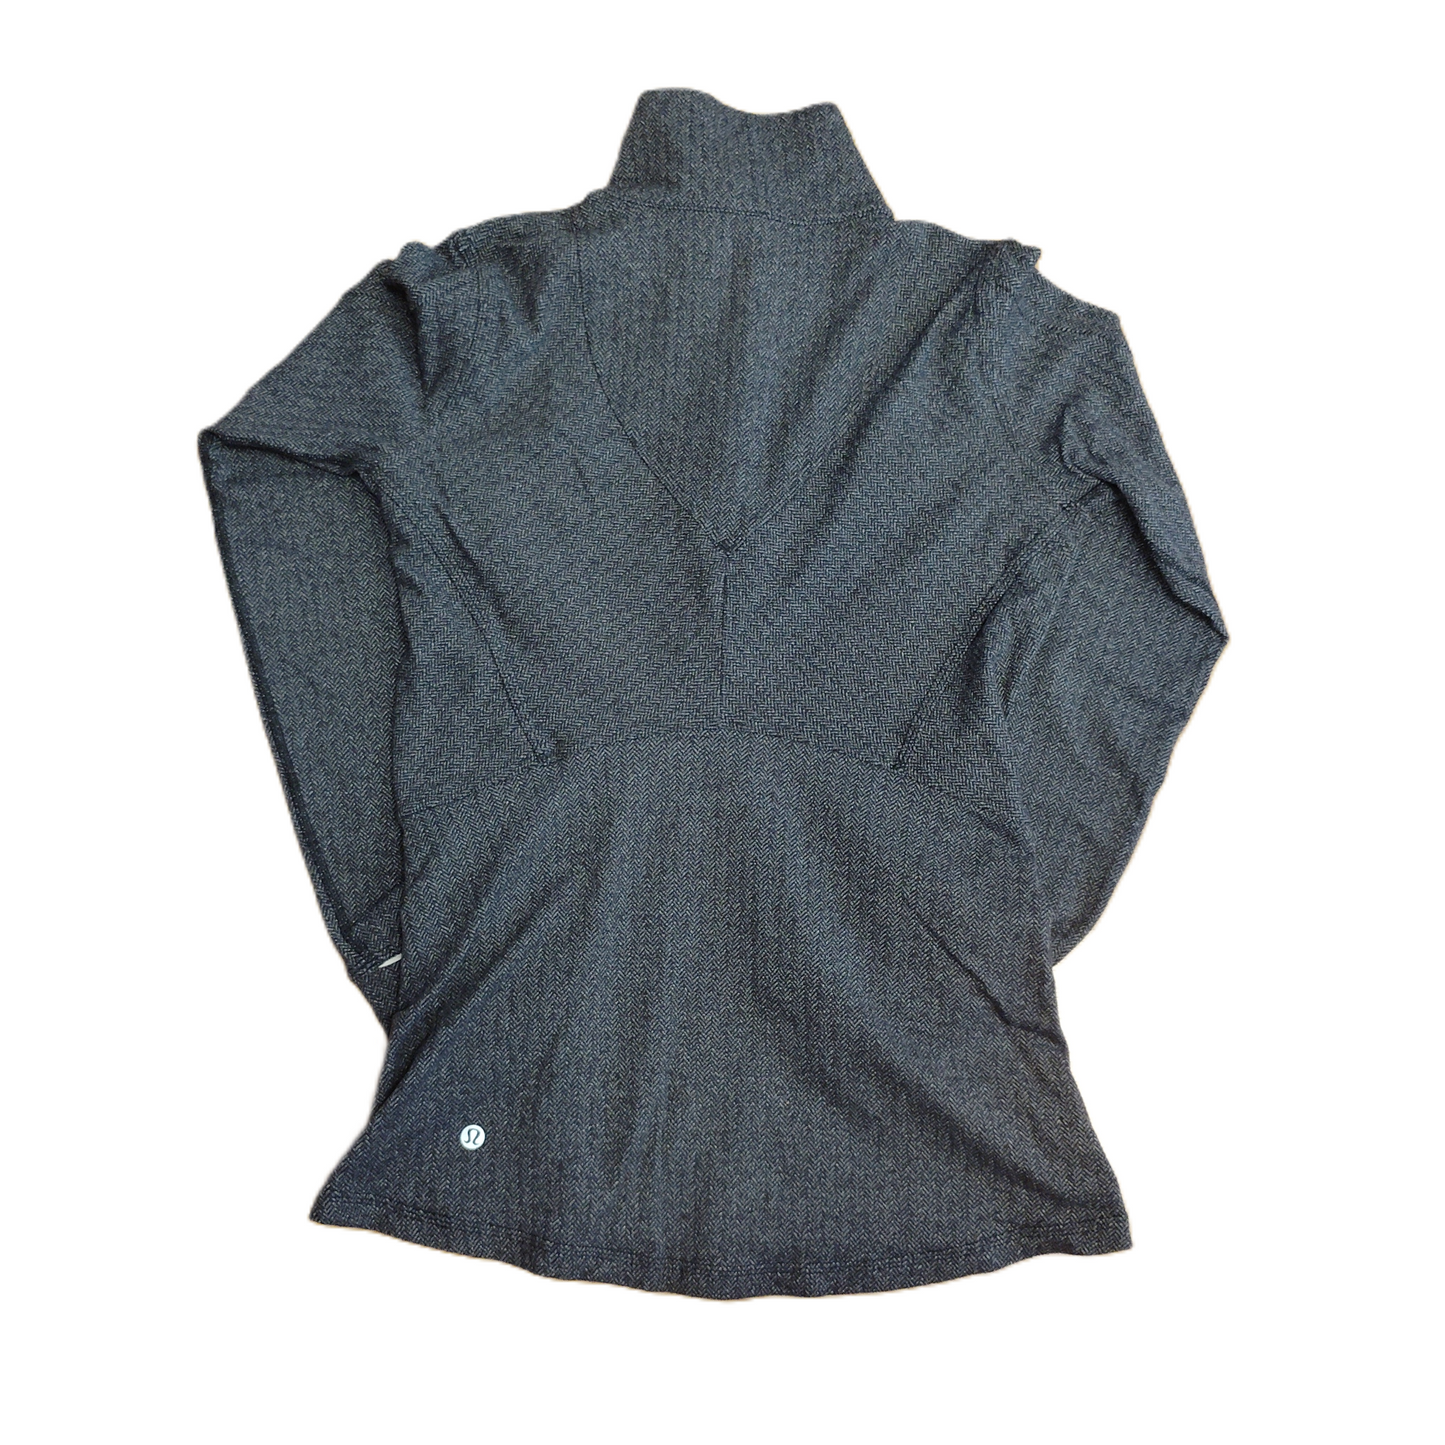 Grey Athletic Top Long Sleeve Collar By Lululemon, Size: S